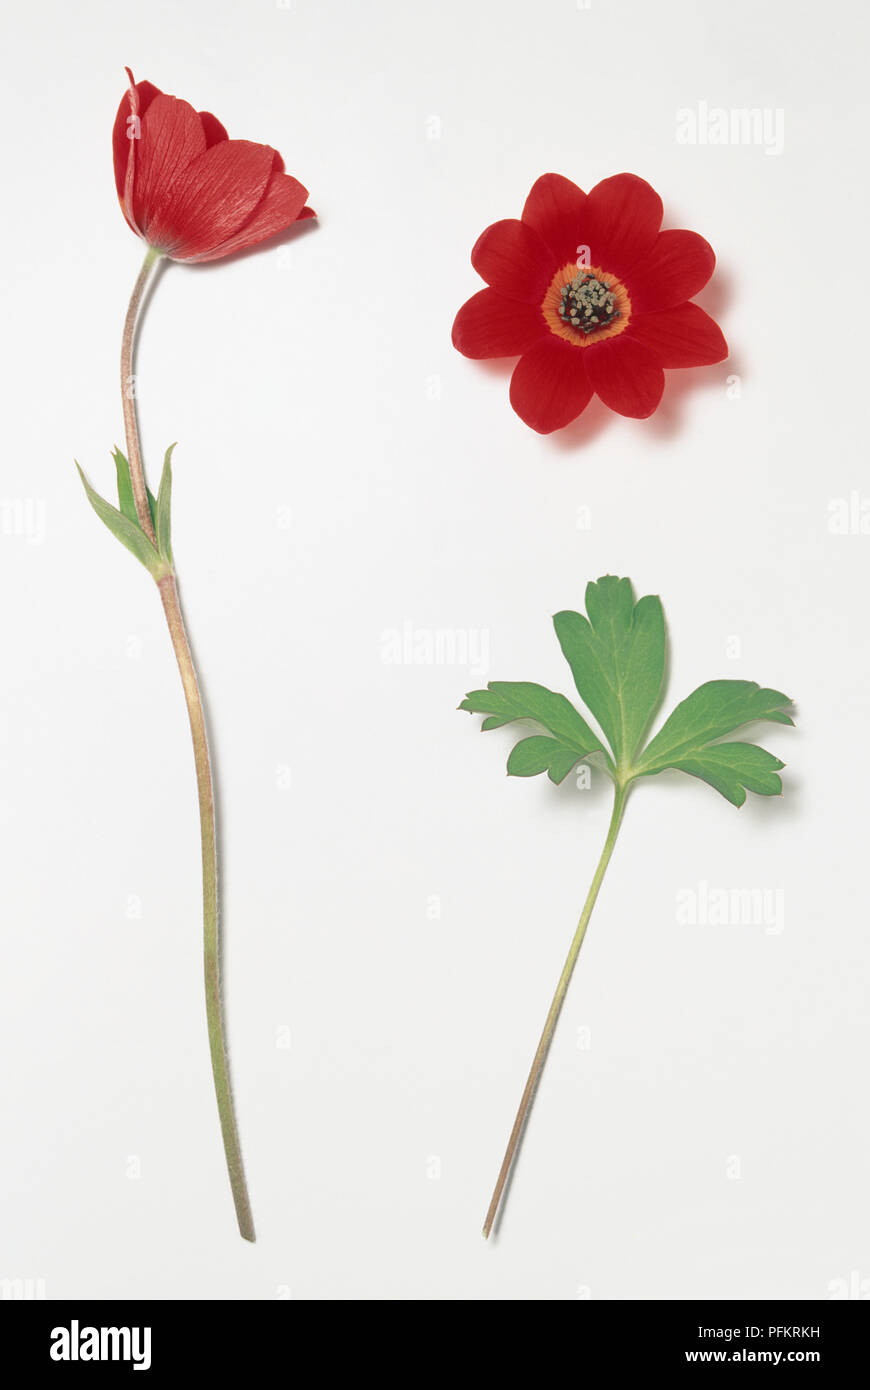 Anemone pavonina, deep red flower with red corolla made up of eight overlapping petals, orange at base, and pale brown anthers Stock Photo